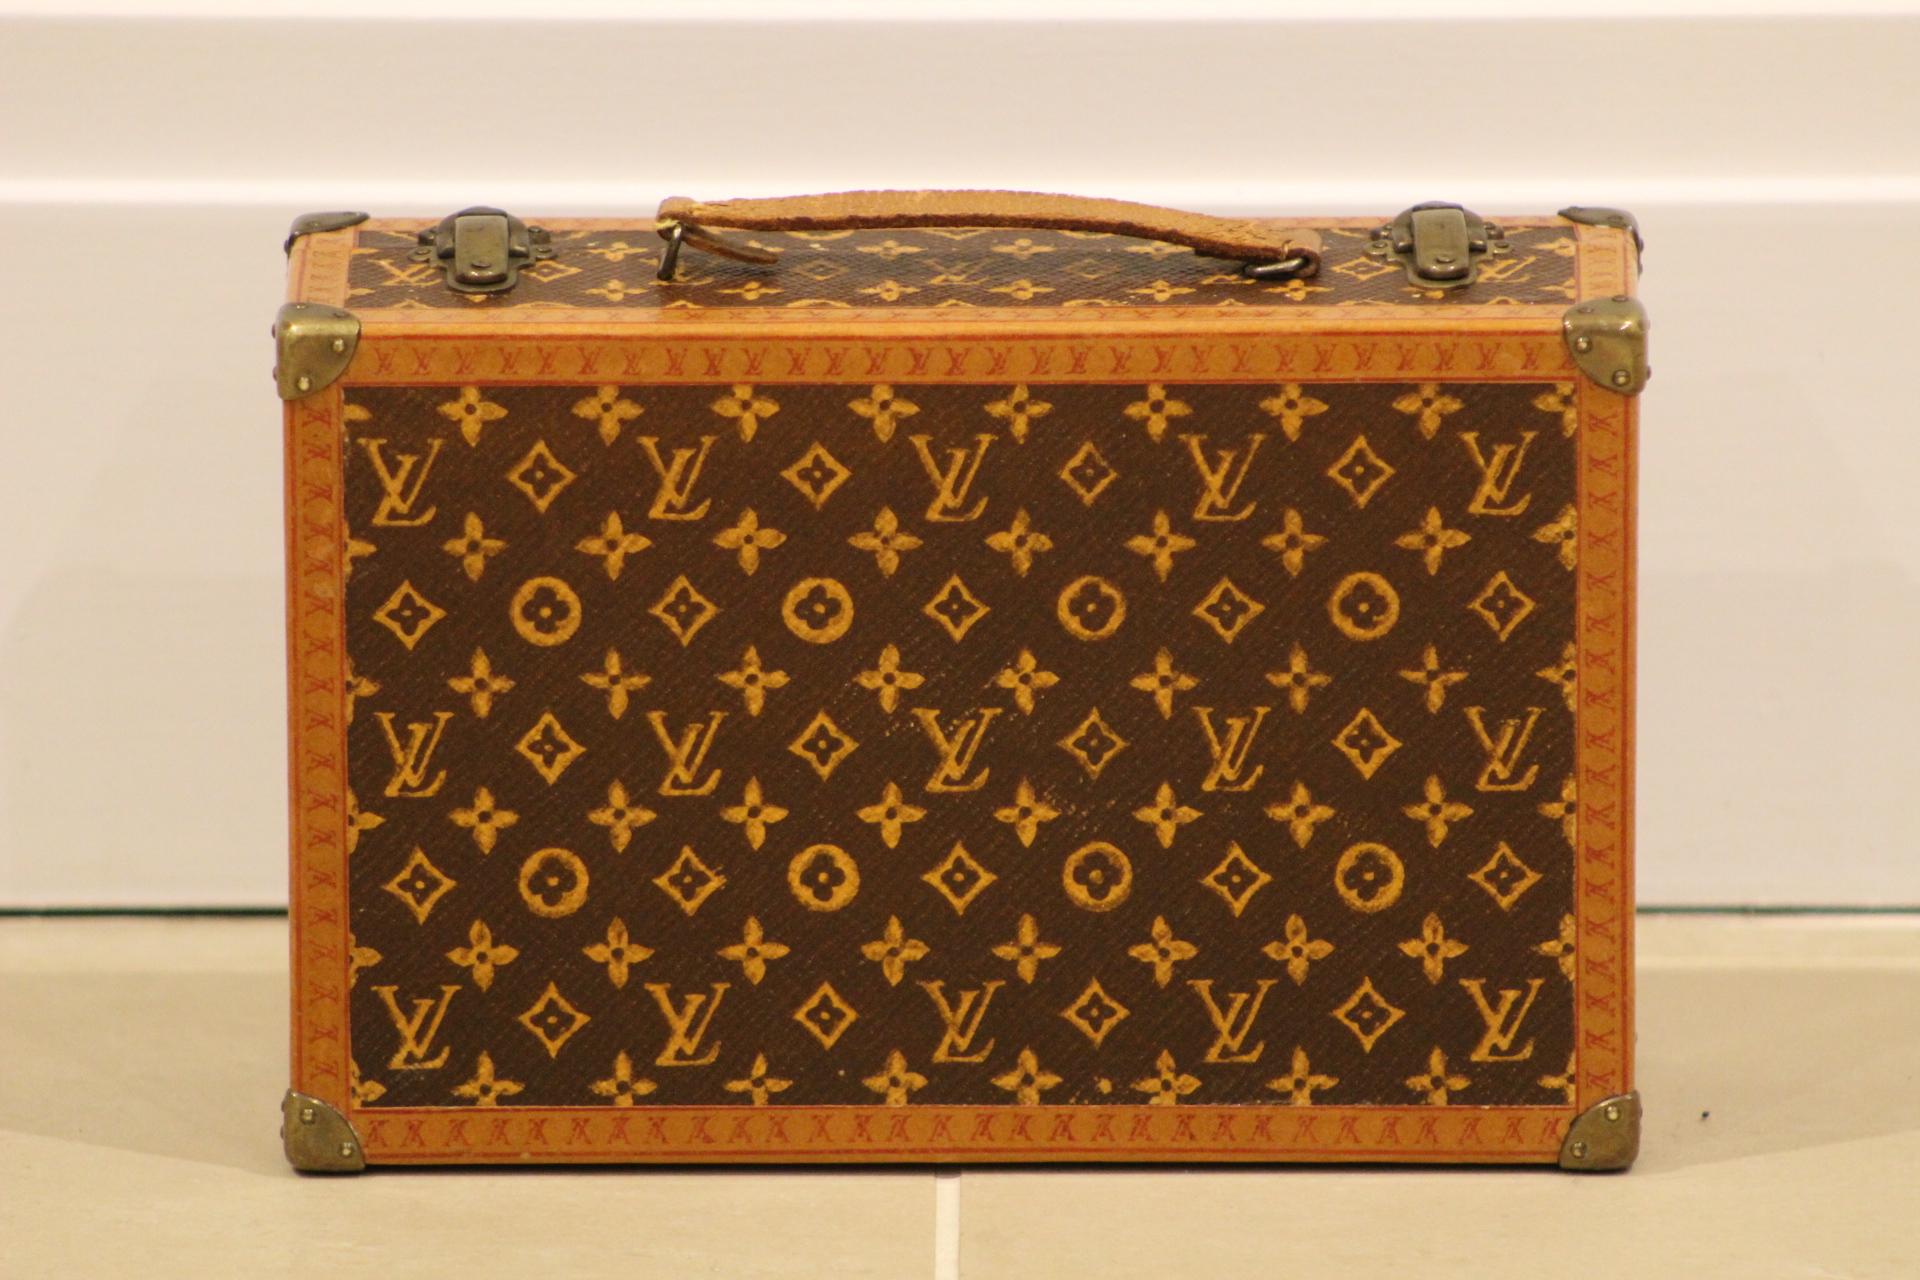 From the revered ateliers of Louis Vuitton comes an extraordinary artifact of the 1930s – an antique miniature trunk that defies convention in its rarity and design. So exceptional is this piece that it stands alone in the market, marking the first